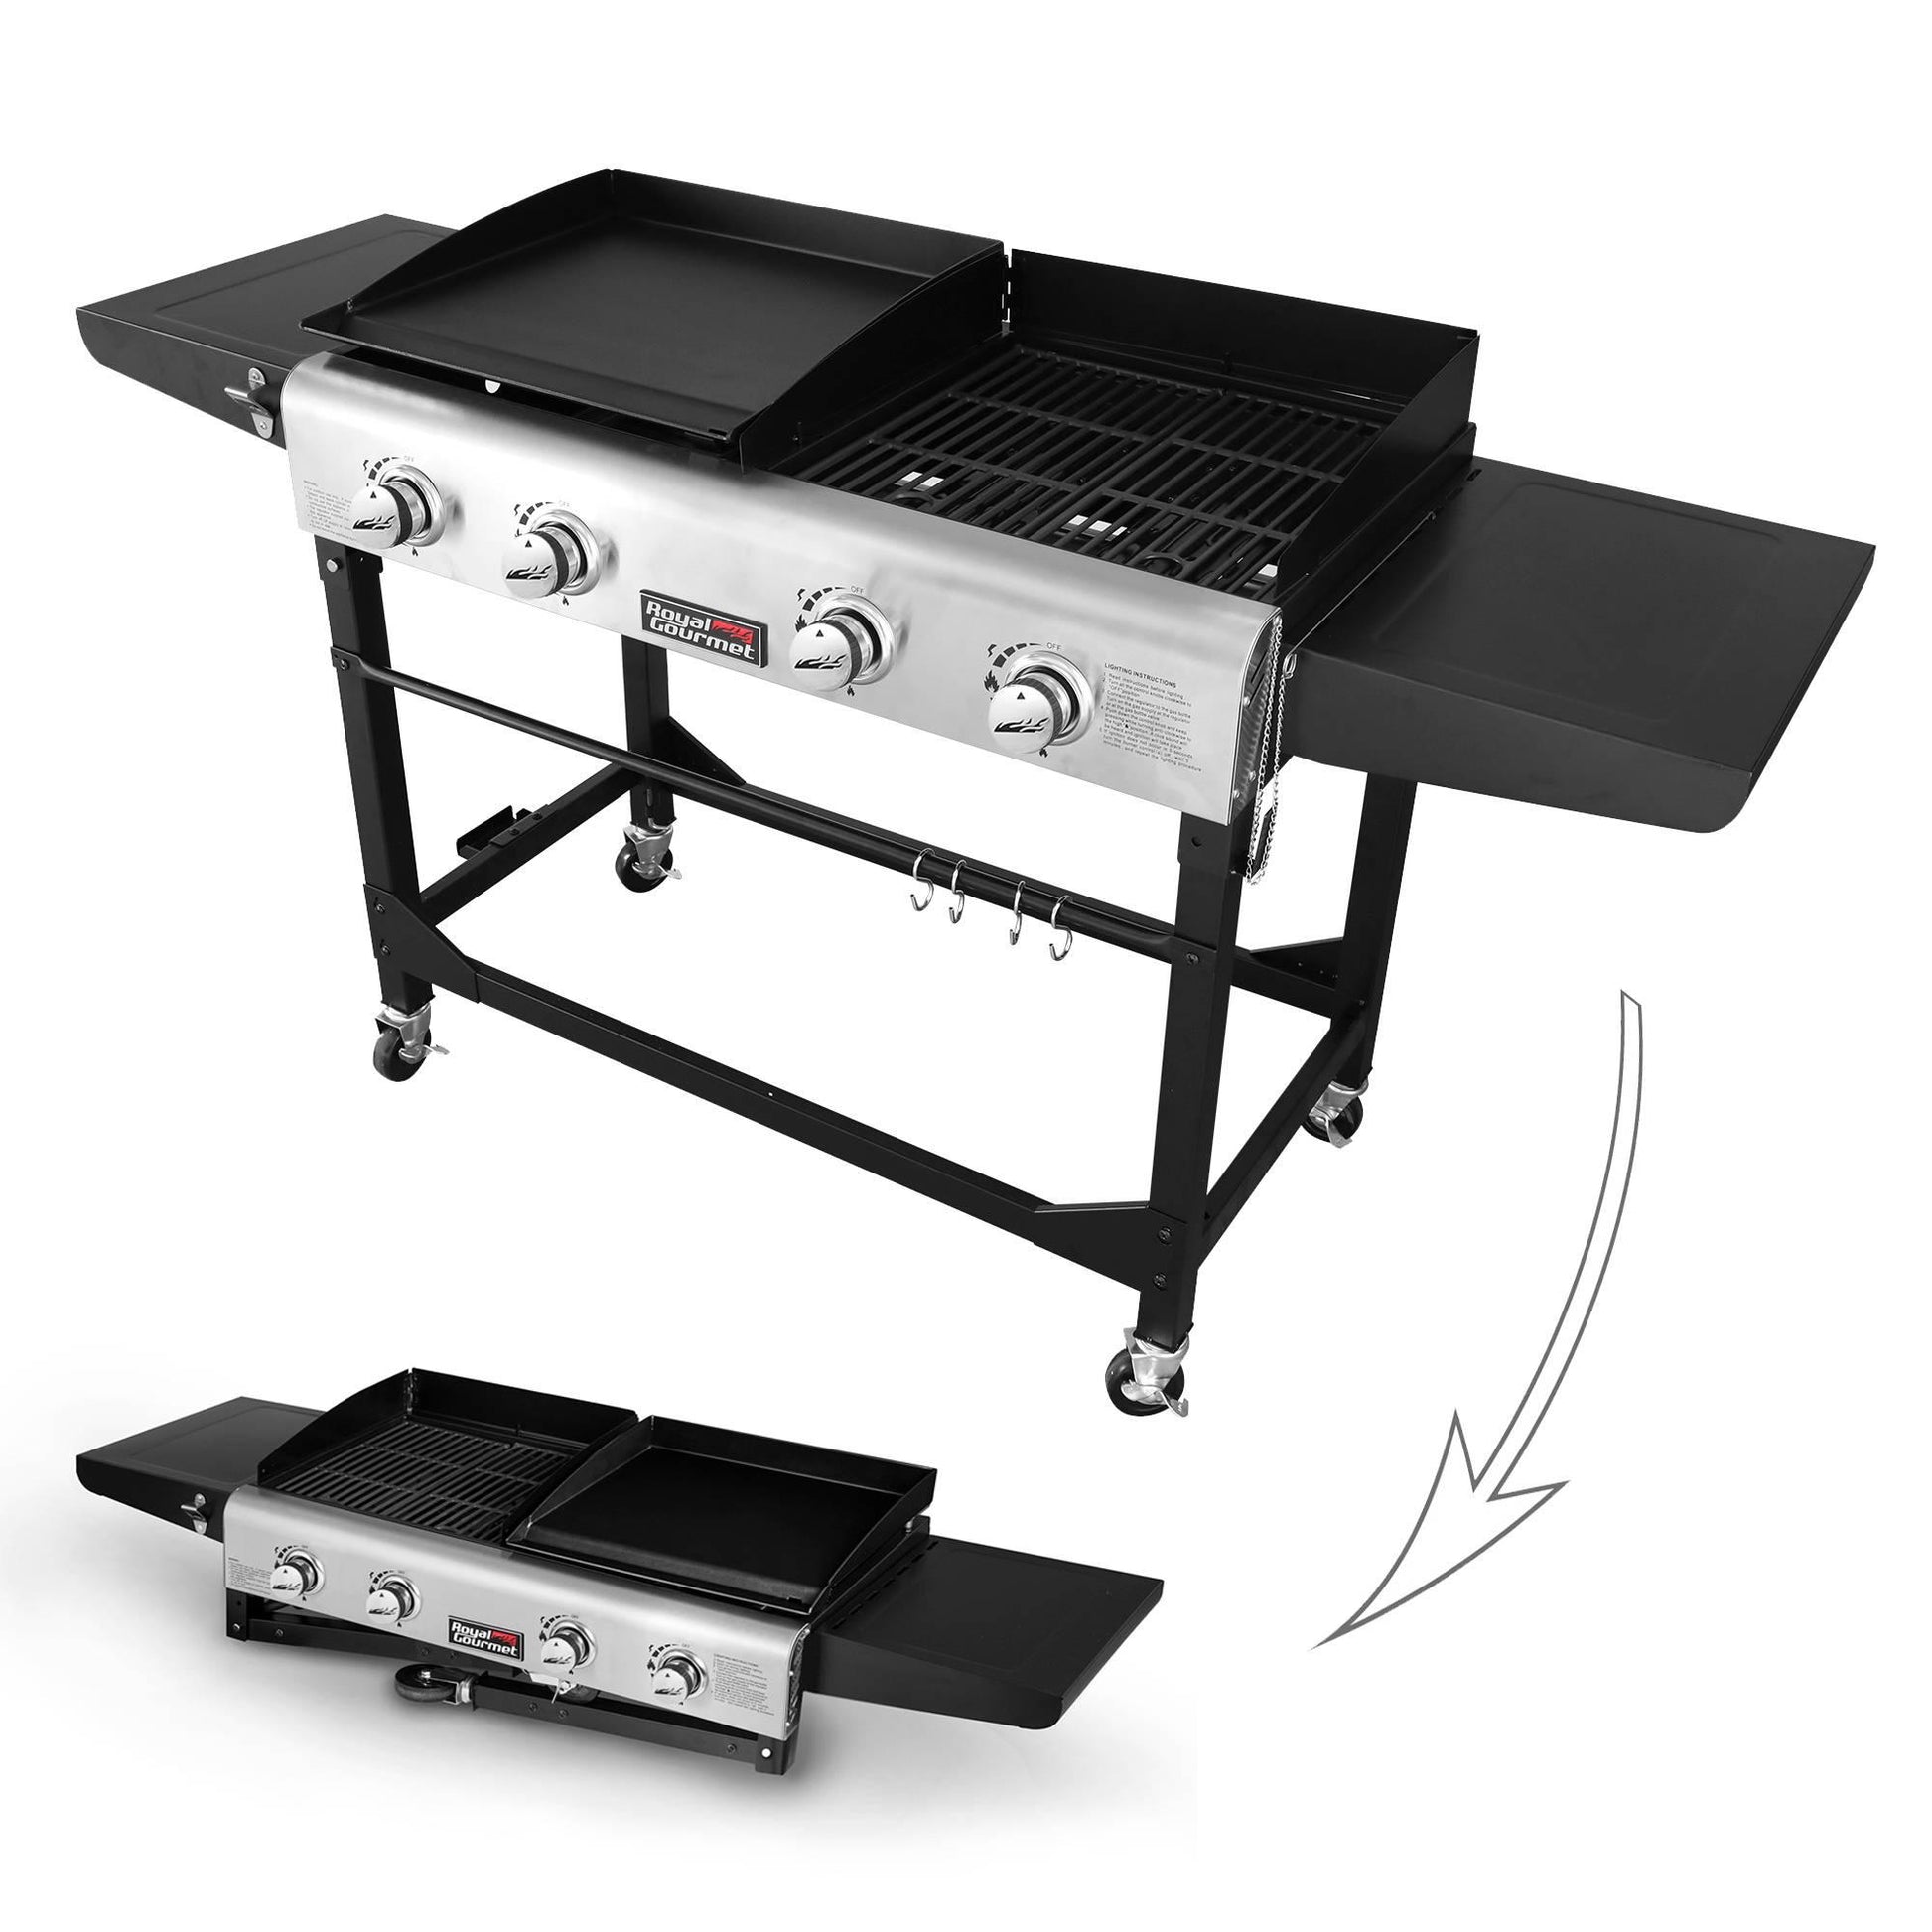 Griddle Gas Grill